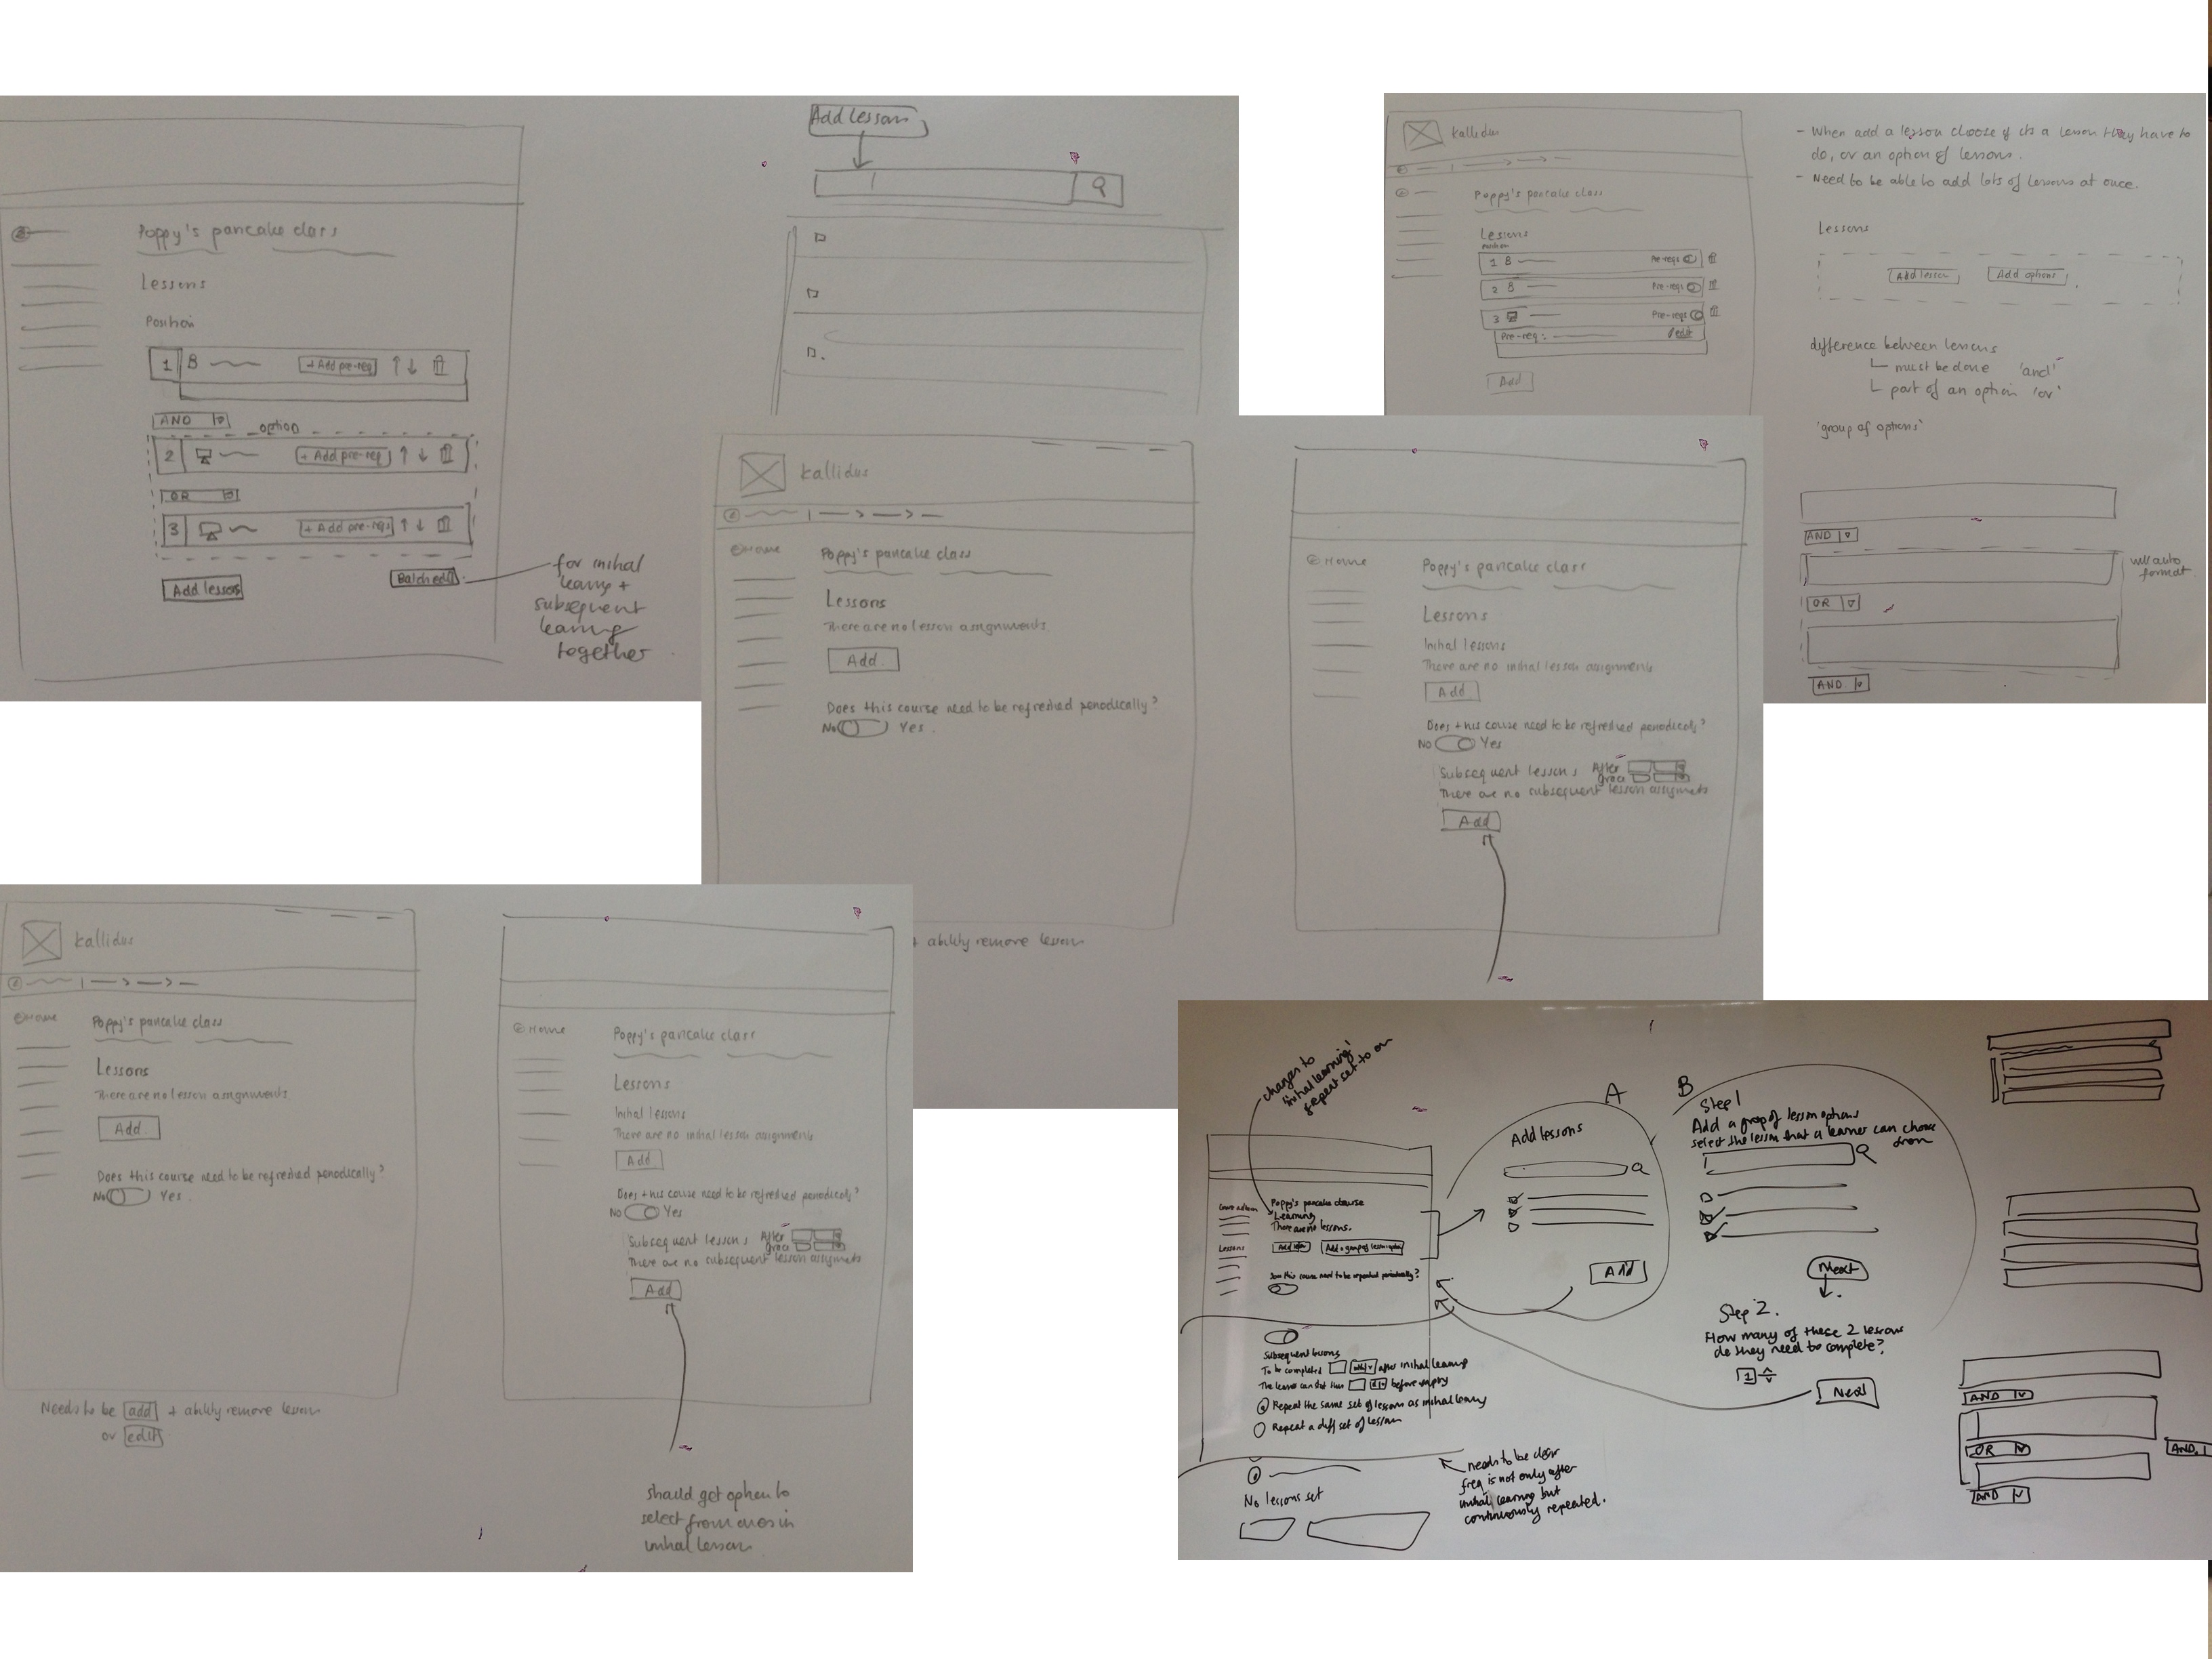 Sketches of initial concepts for admin screens